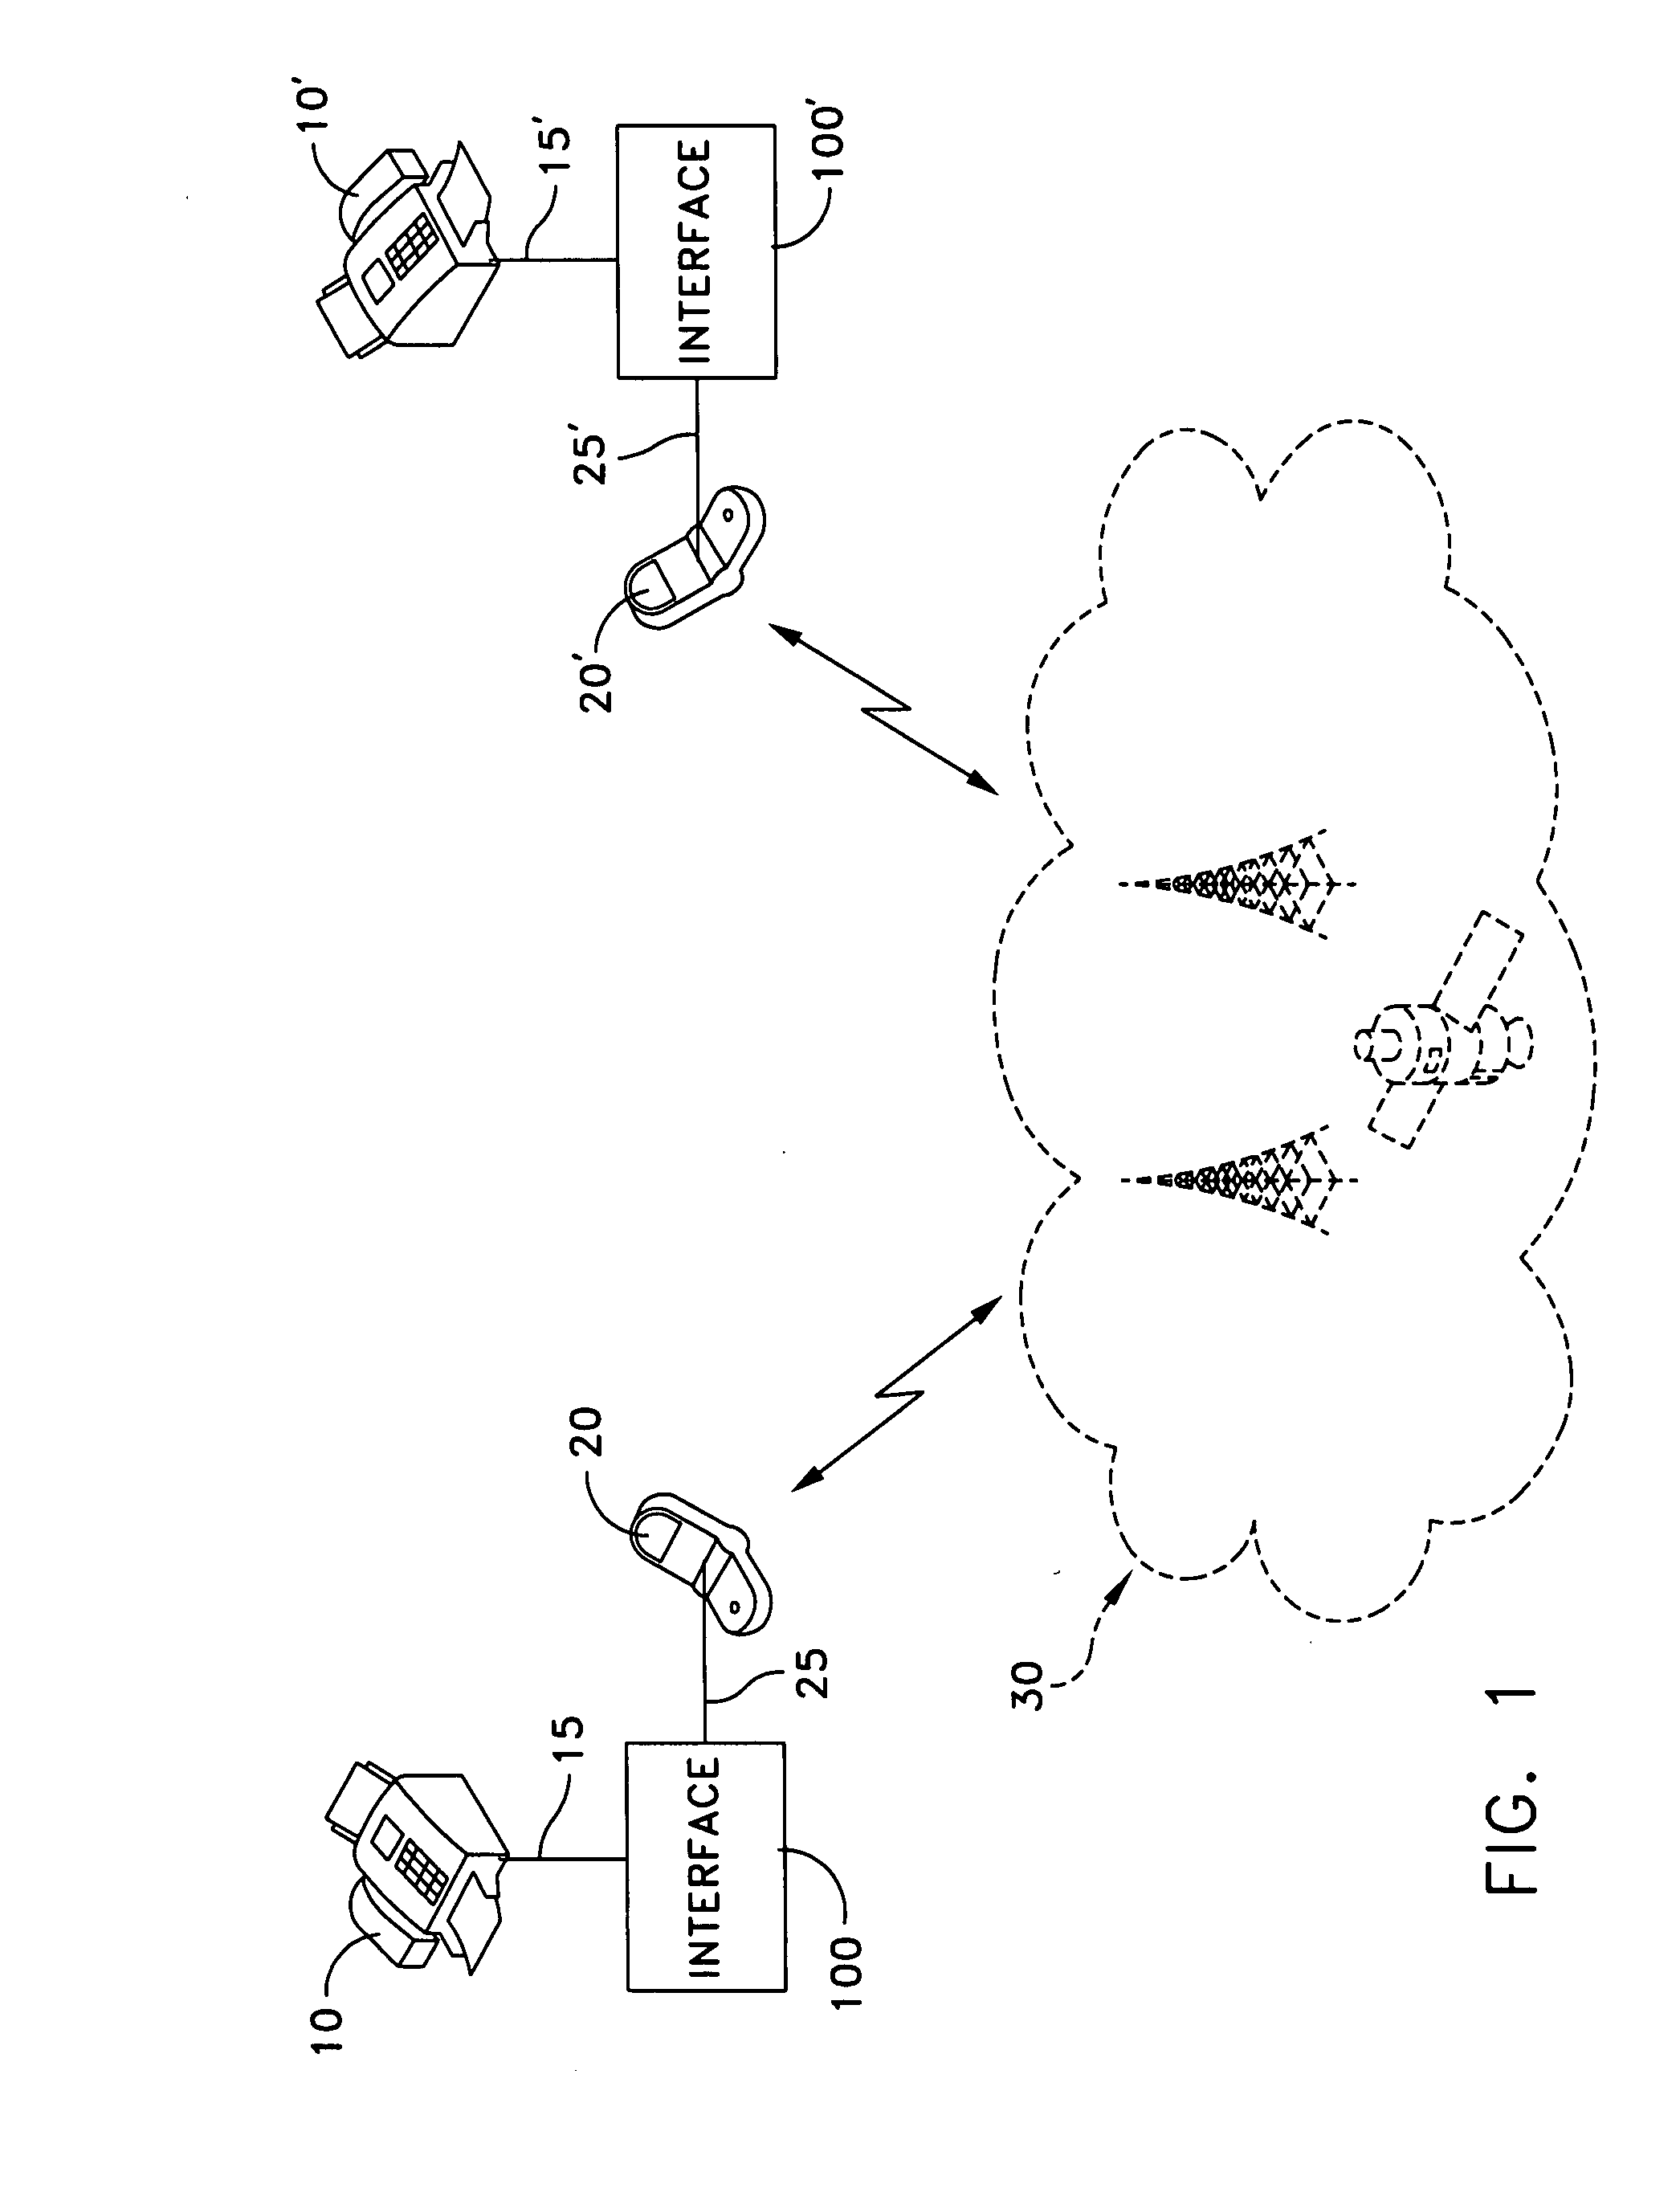 Interface for facilitating facsimile transmissions via wireless communications networks